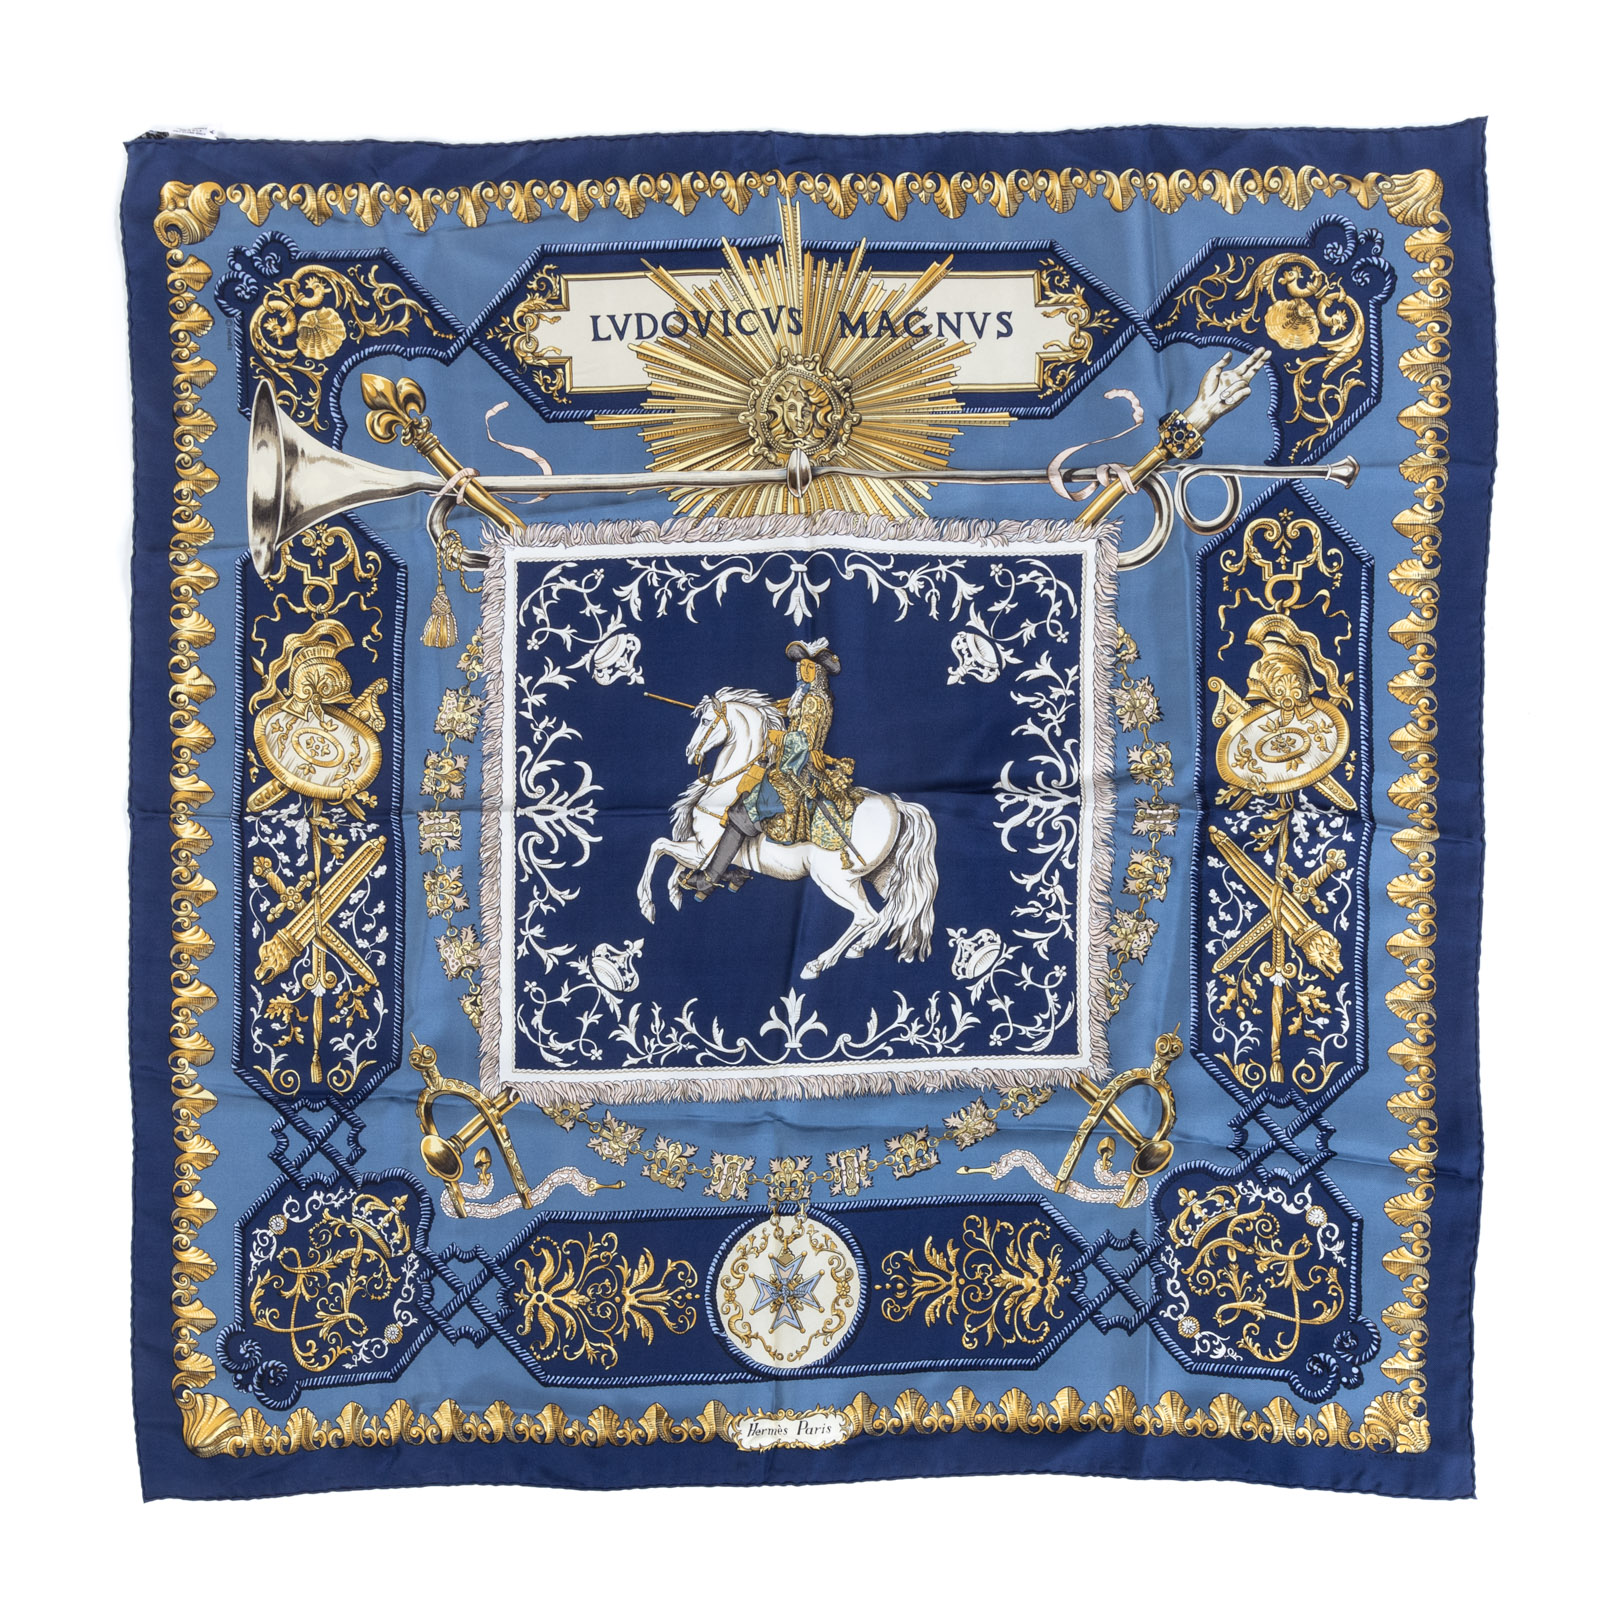 AN HERMES "LUDOVICUS MAGNUS" SCARF